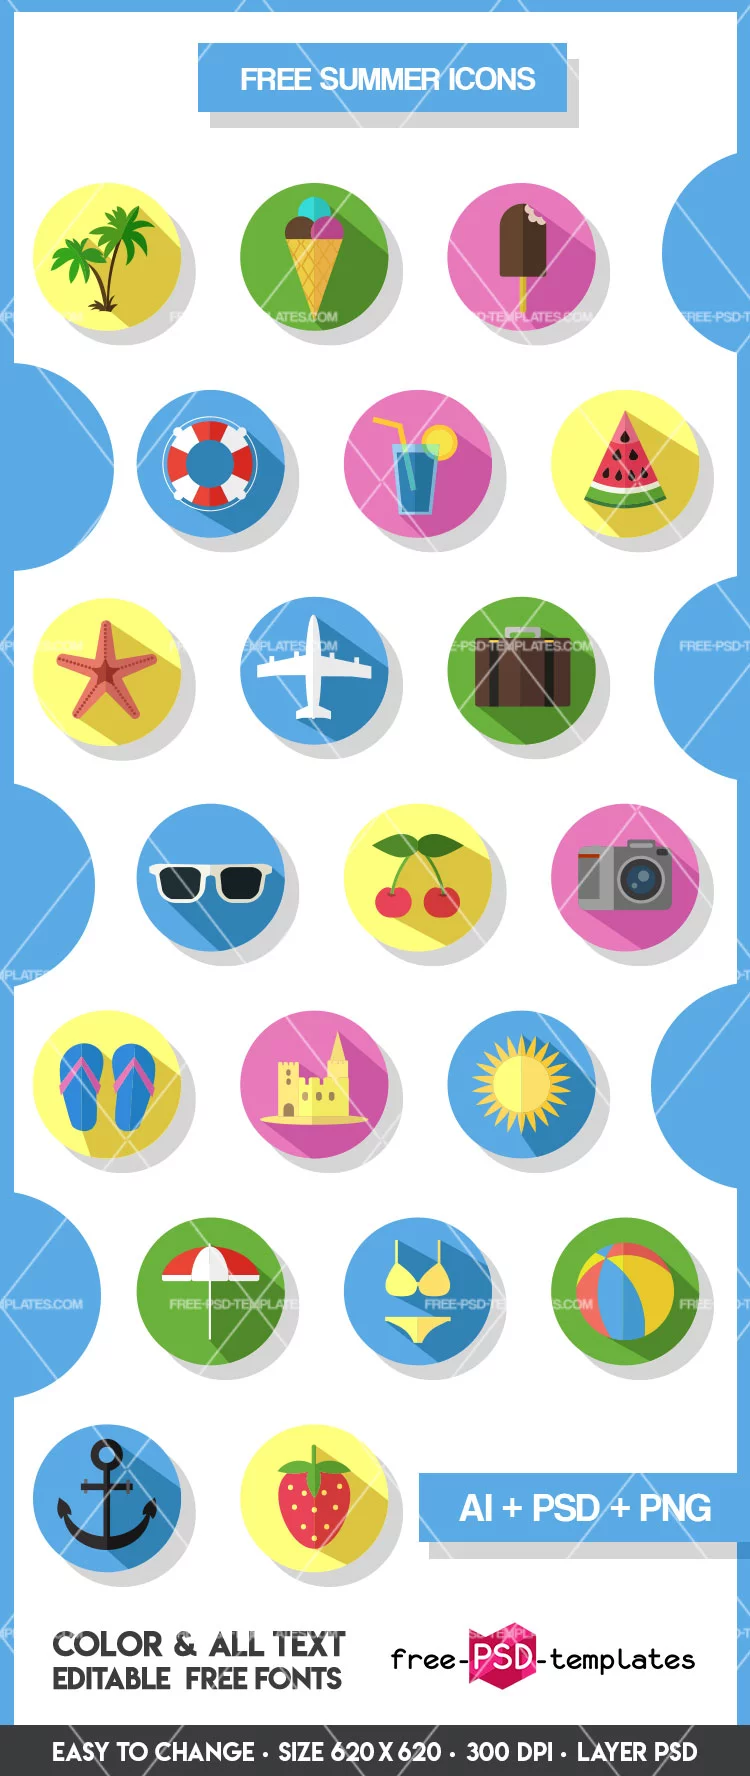 FREE Summer Icons